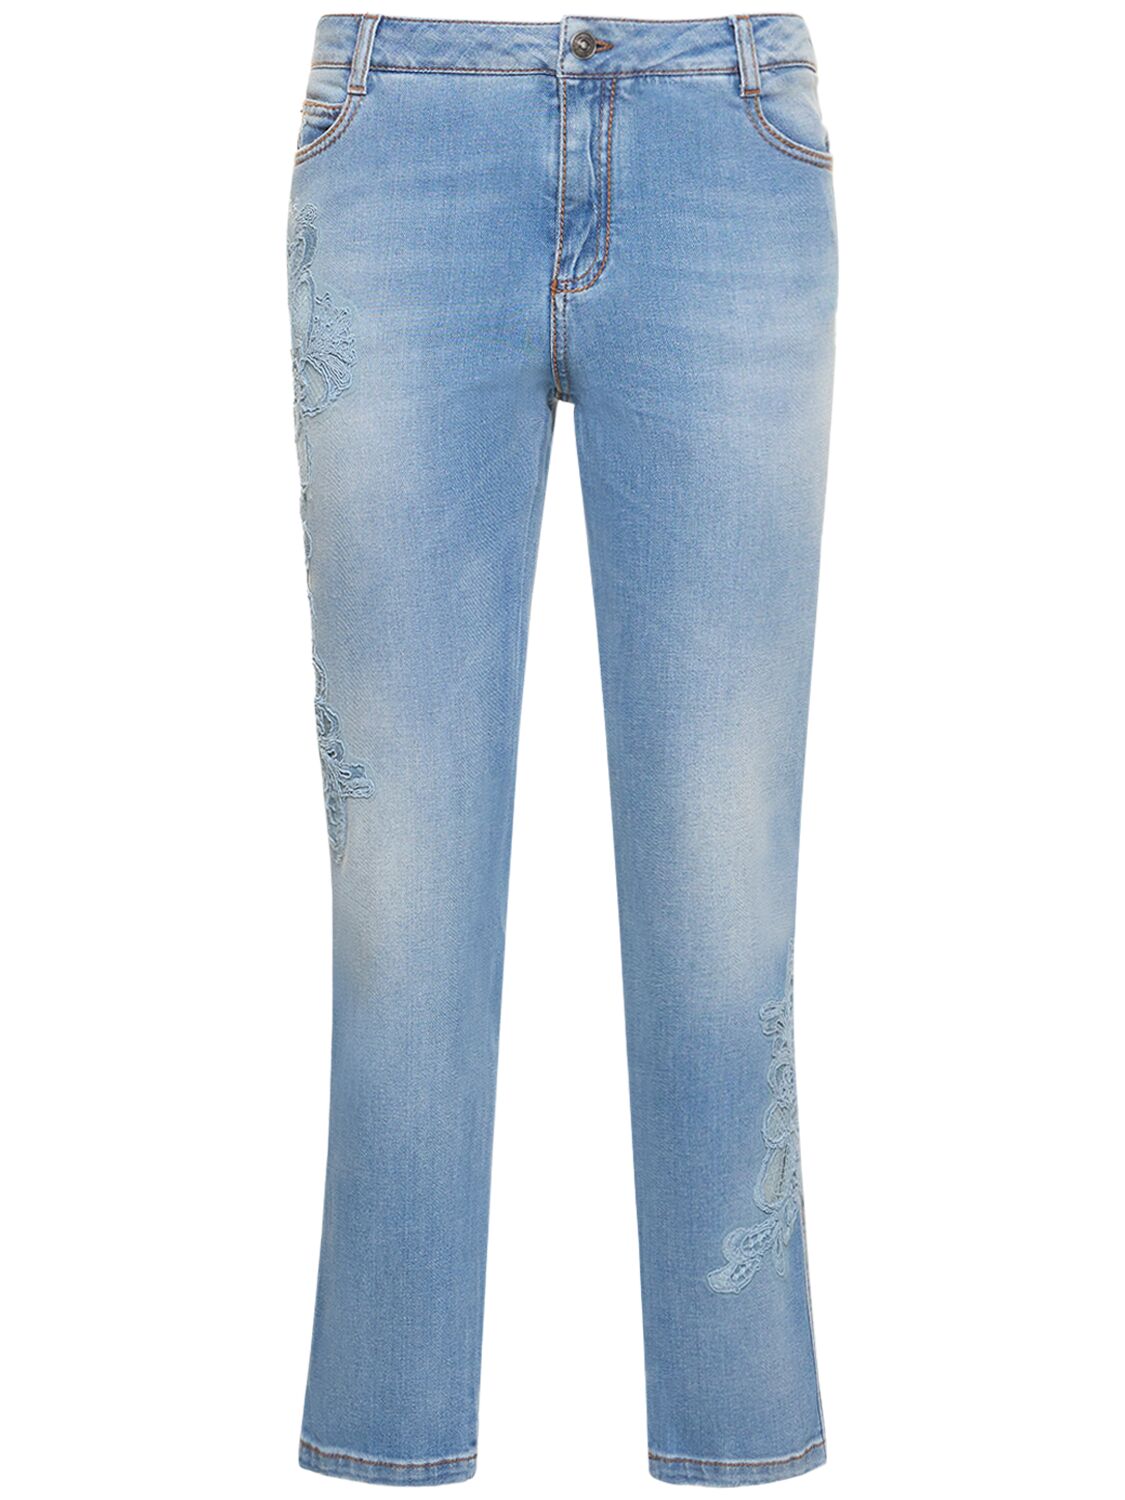 Denim Mid Rise Skinny Jeans W/embroidery